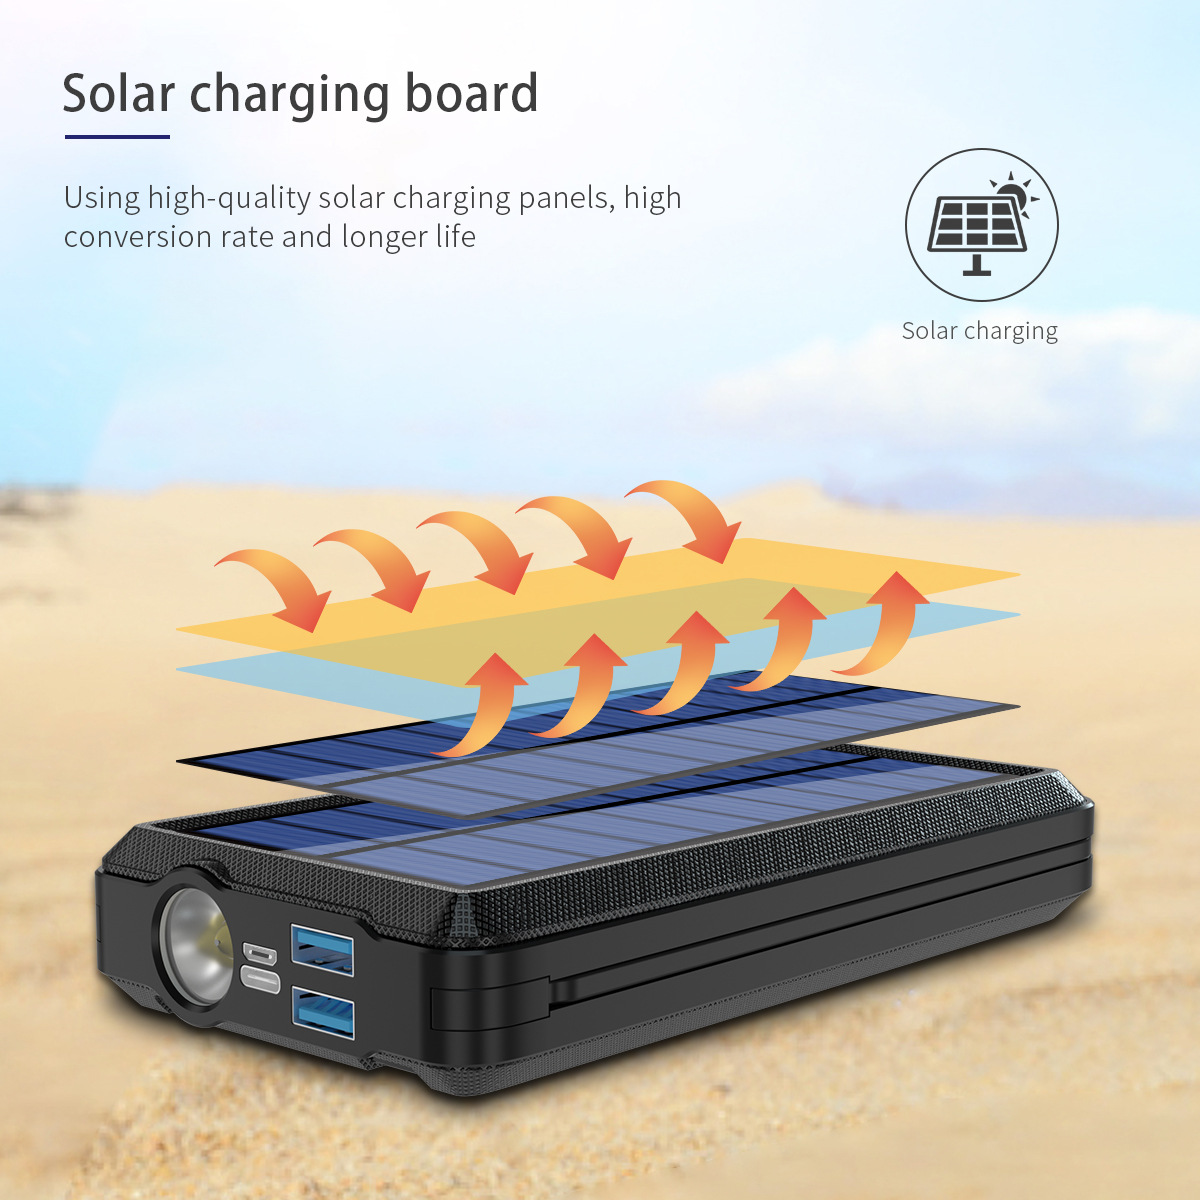 Bakeey-30000mAh-Solar-Panel-Dual-USB-Waterproof-Wireless-Charger-Power-Bank-with-Type-C-Micro-USB-In-1874905-3